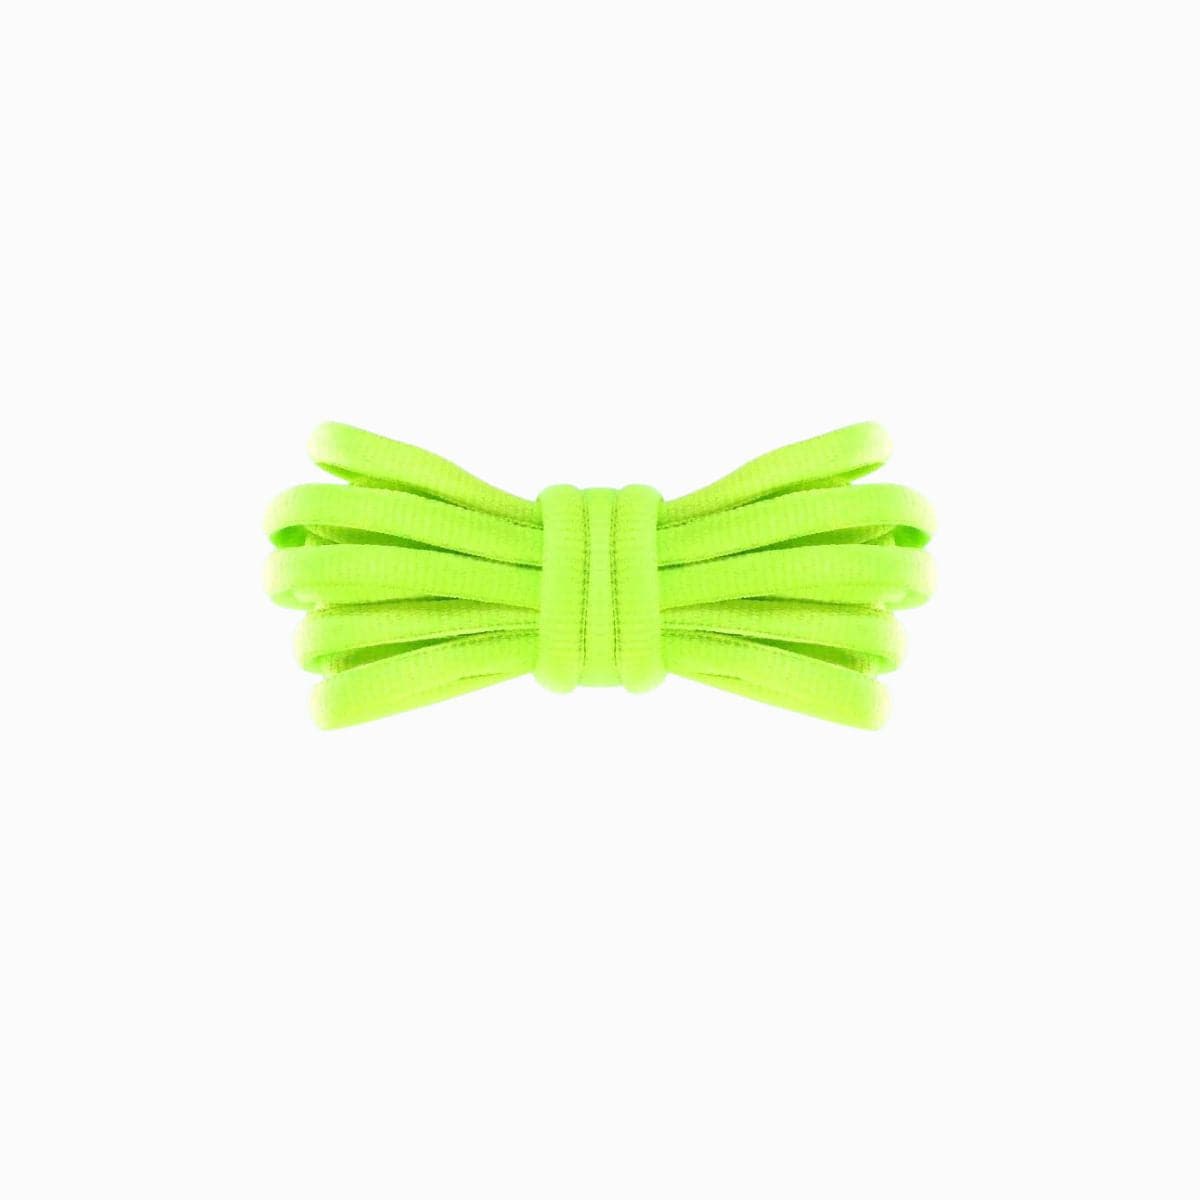 Nike_TN_Replacement_Shoelaces_Fluorescent_Yellow